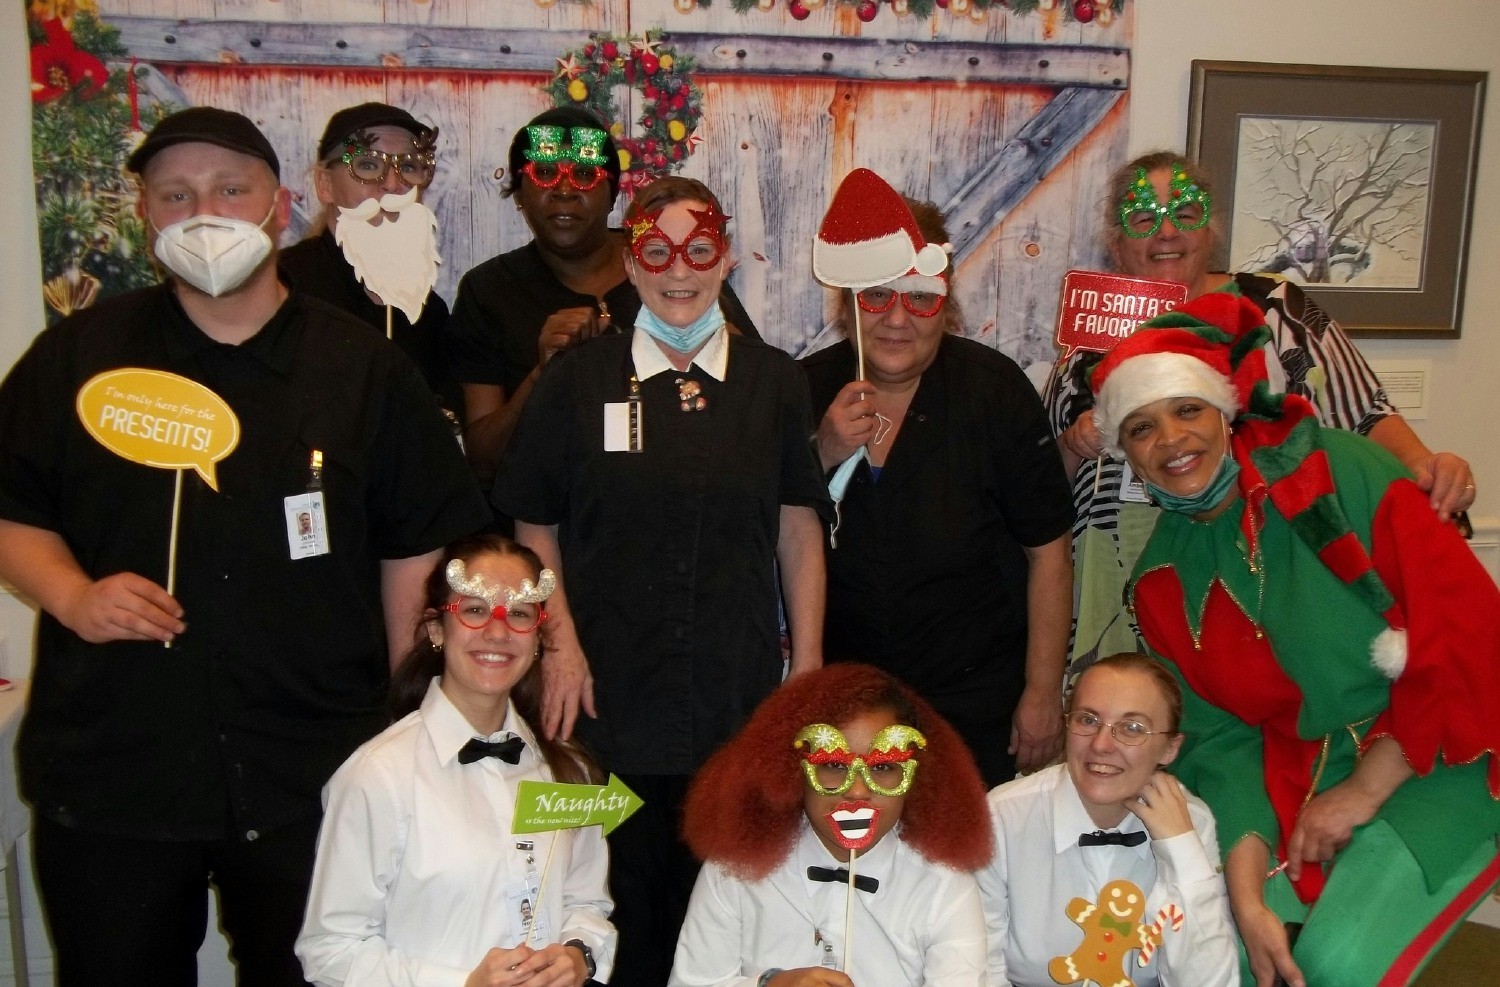 These associates know how to get into the Holiday spirit and spread good cheer.